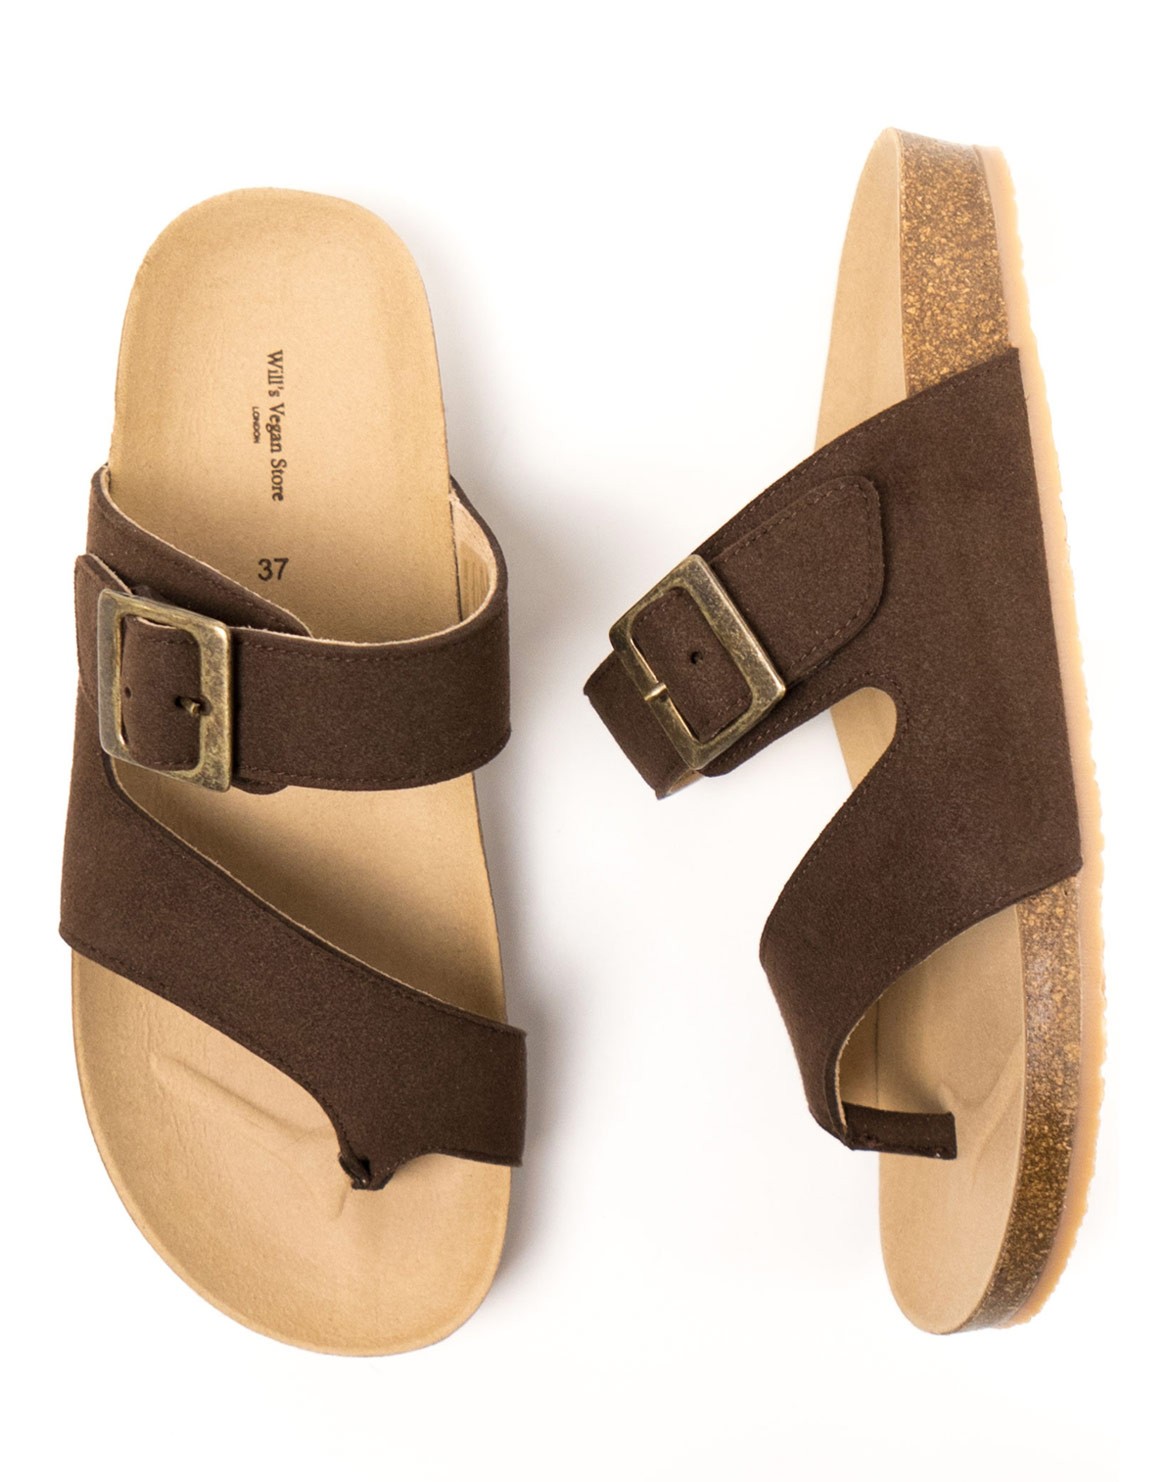 Two Strap Toe Pag Sandals